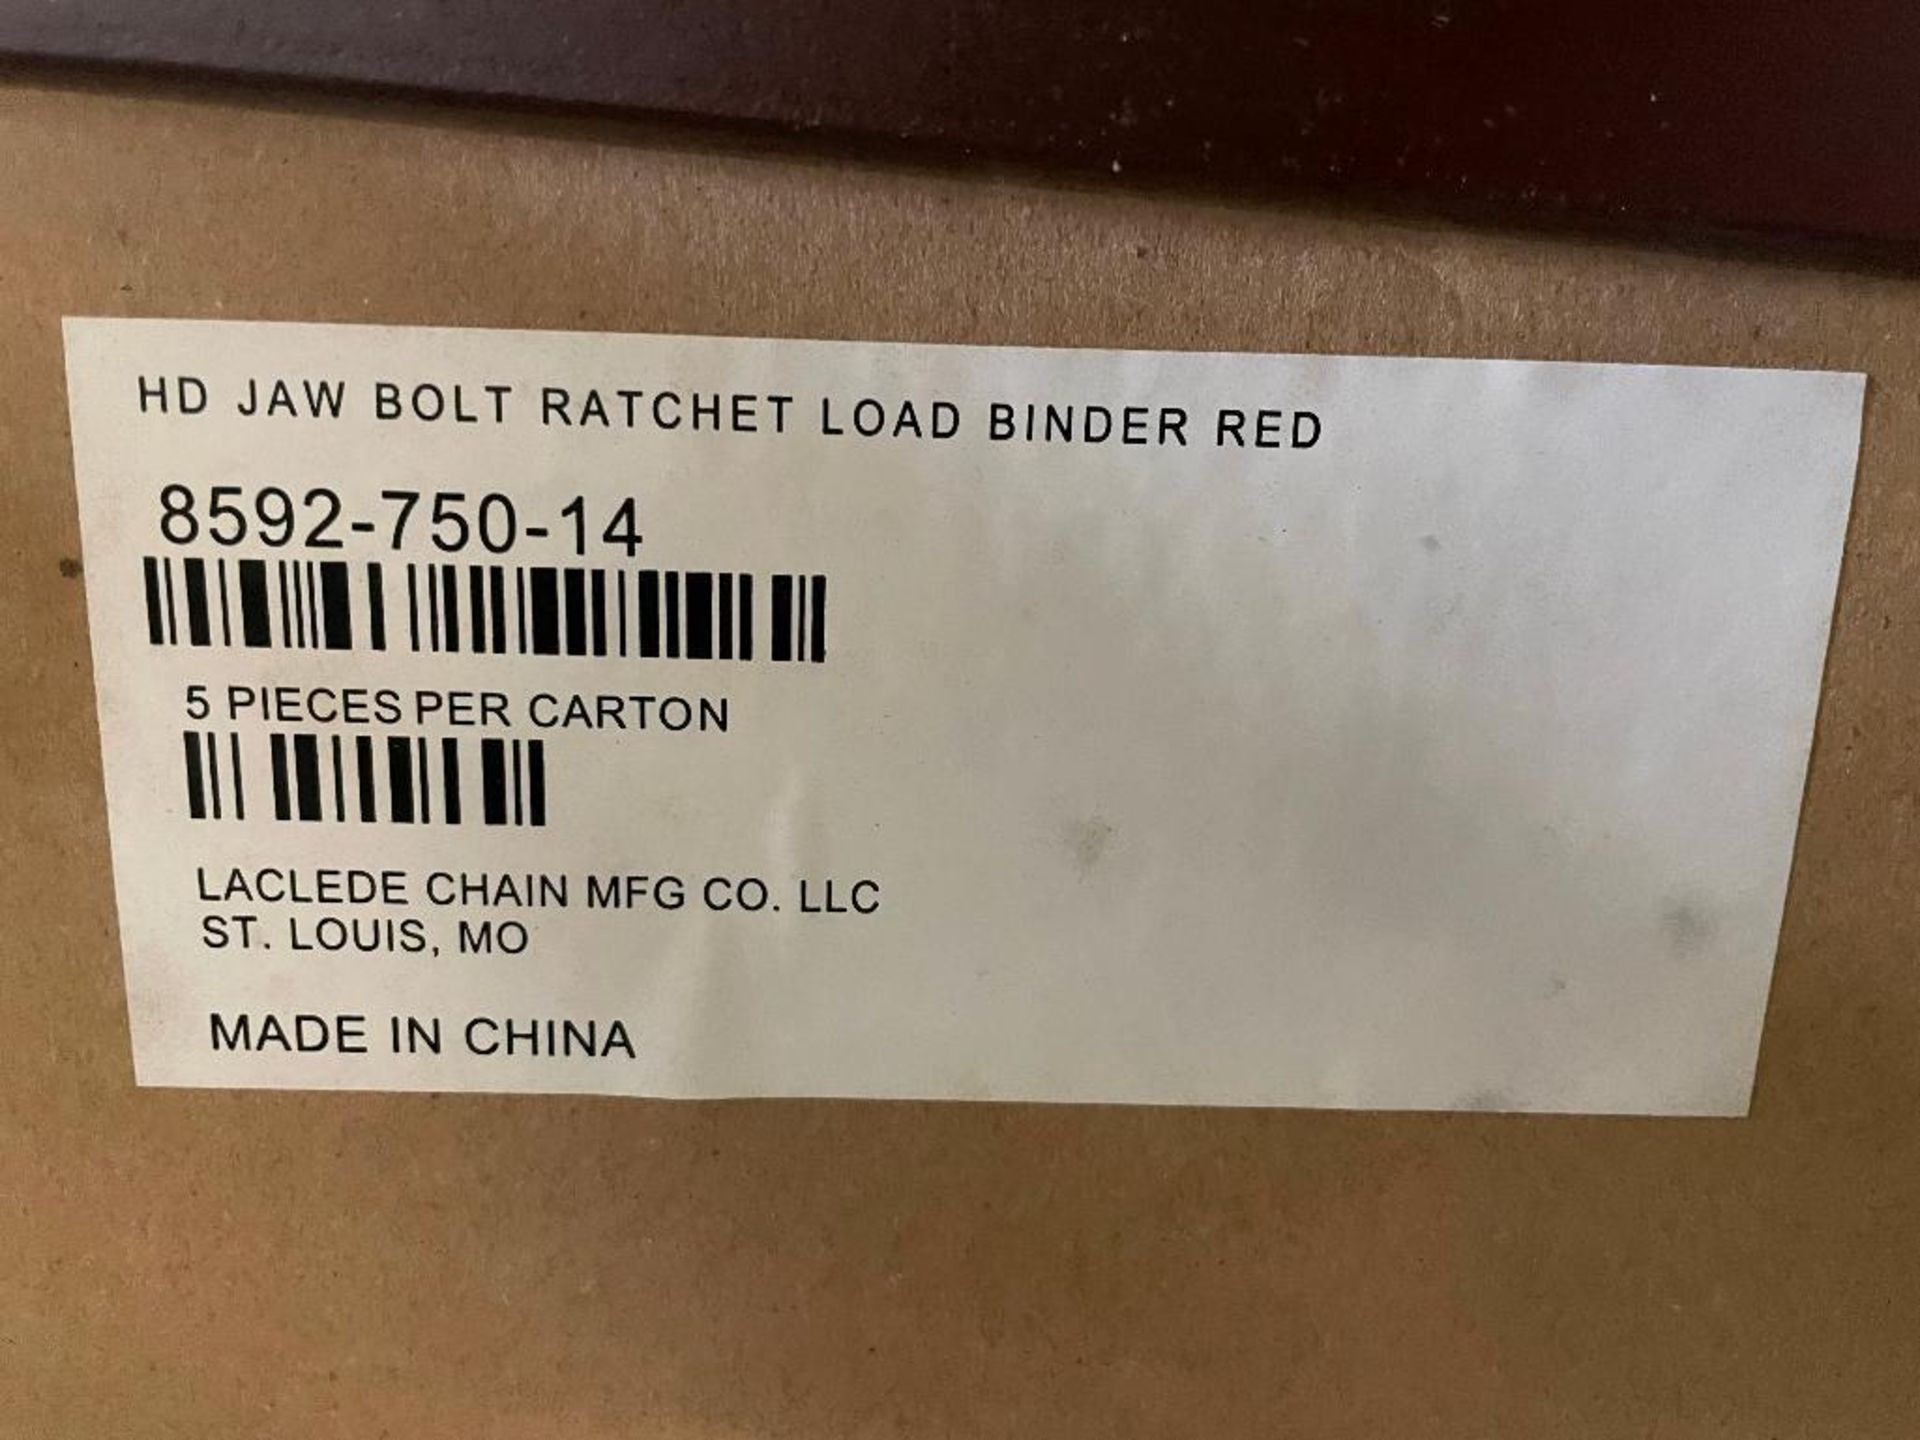 DESCRIPTION: (2) CASES OF HD JAW BOLT RATCHET LOAD BINDERS - RED. 5 PER CASE, 10 IN LOT TOTAL. BRAND - Image 6 of 6